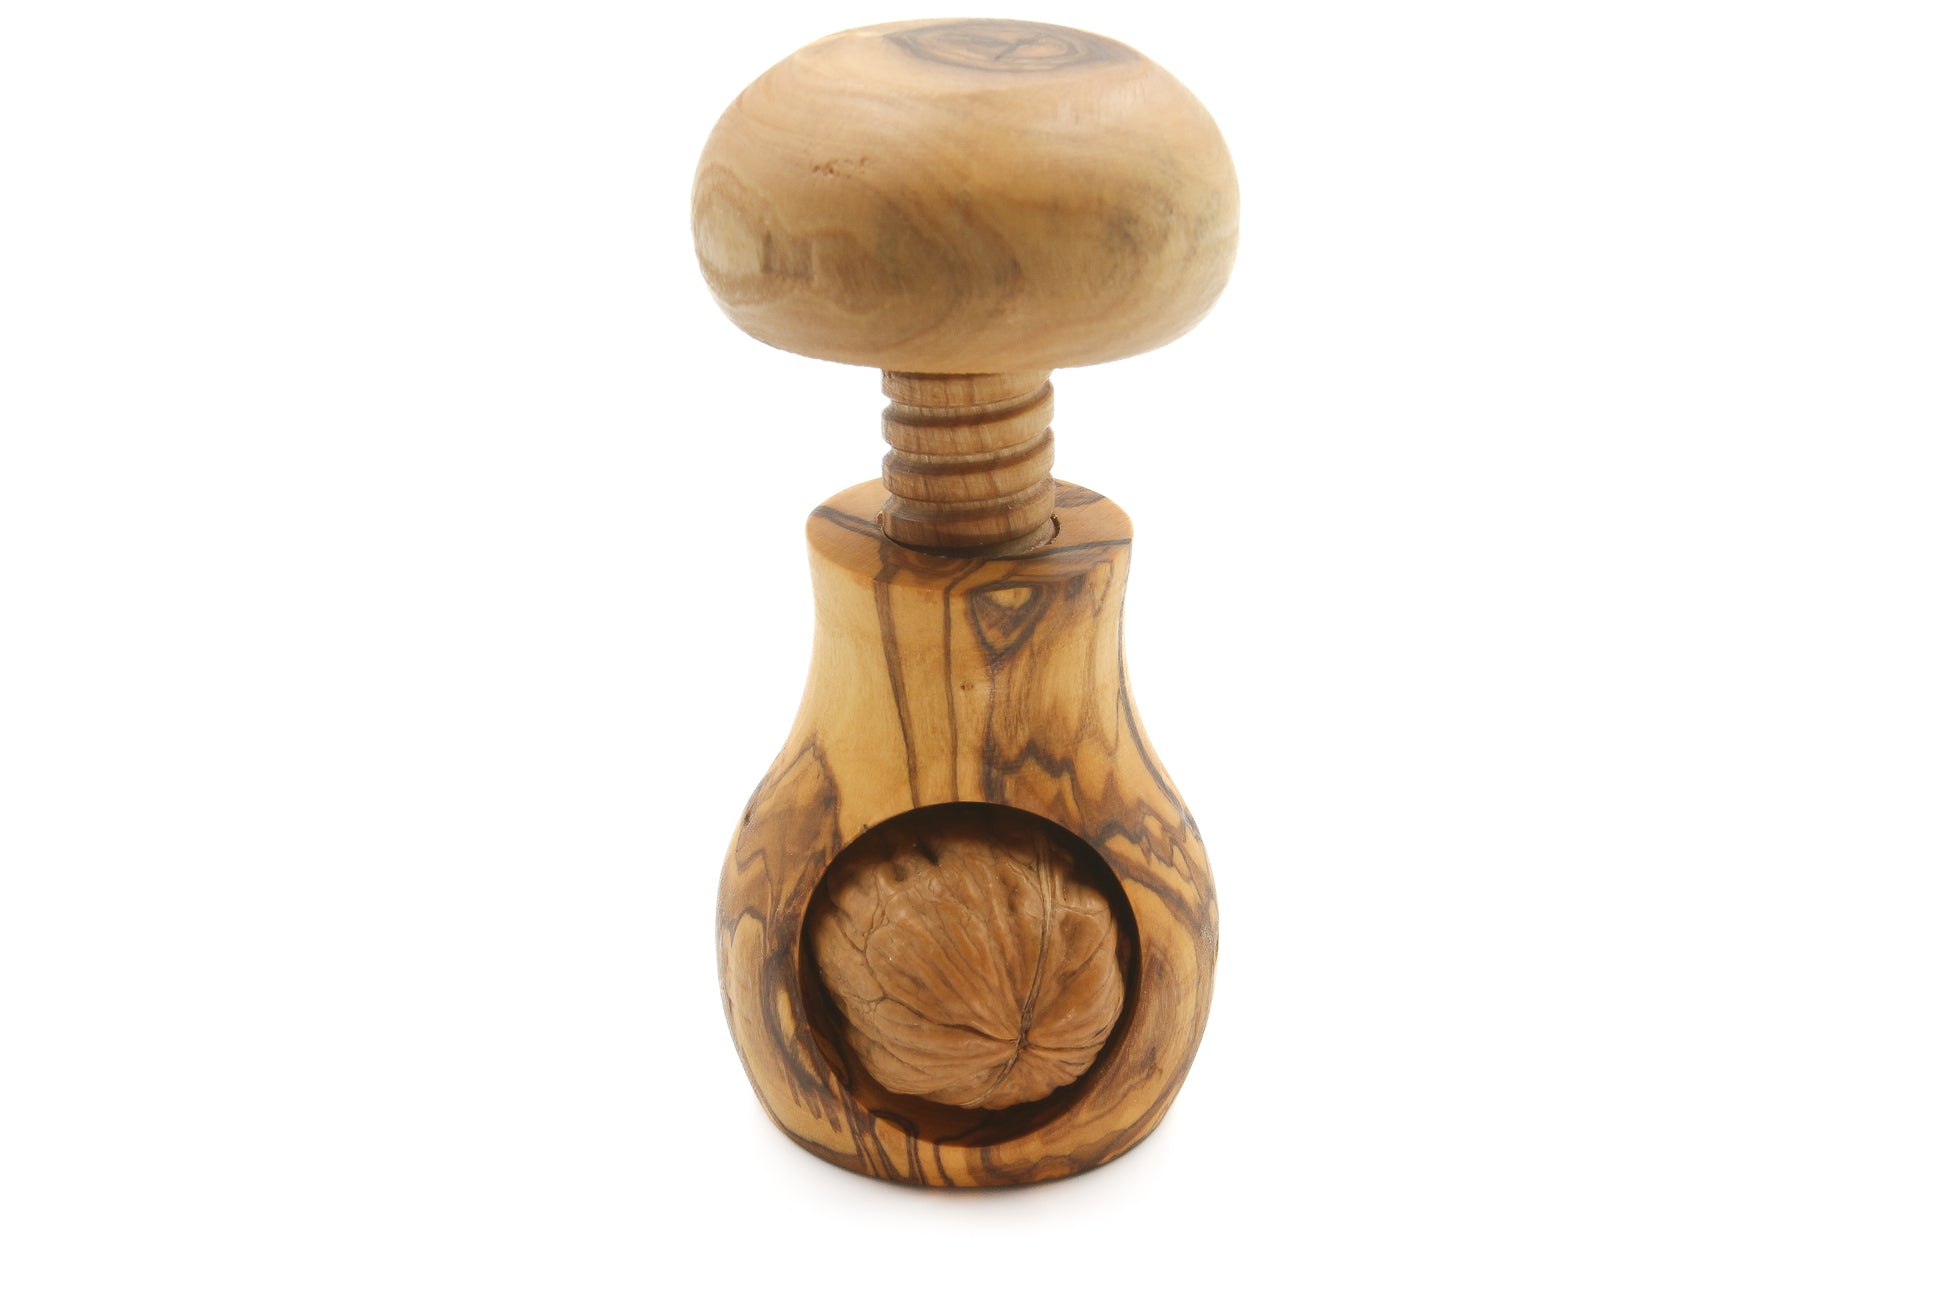 Handcrafted olive wood screw nutcracker for cracking nuts